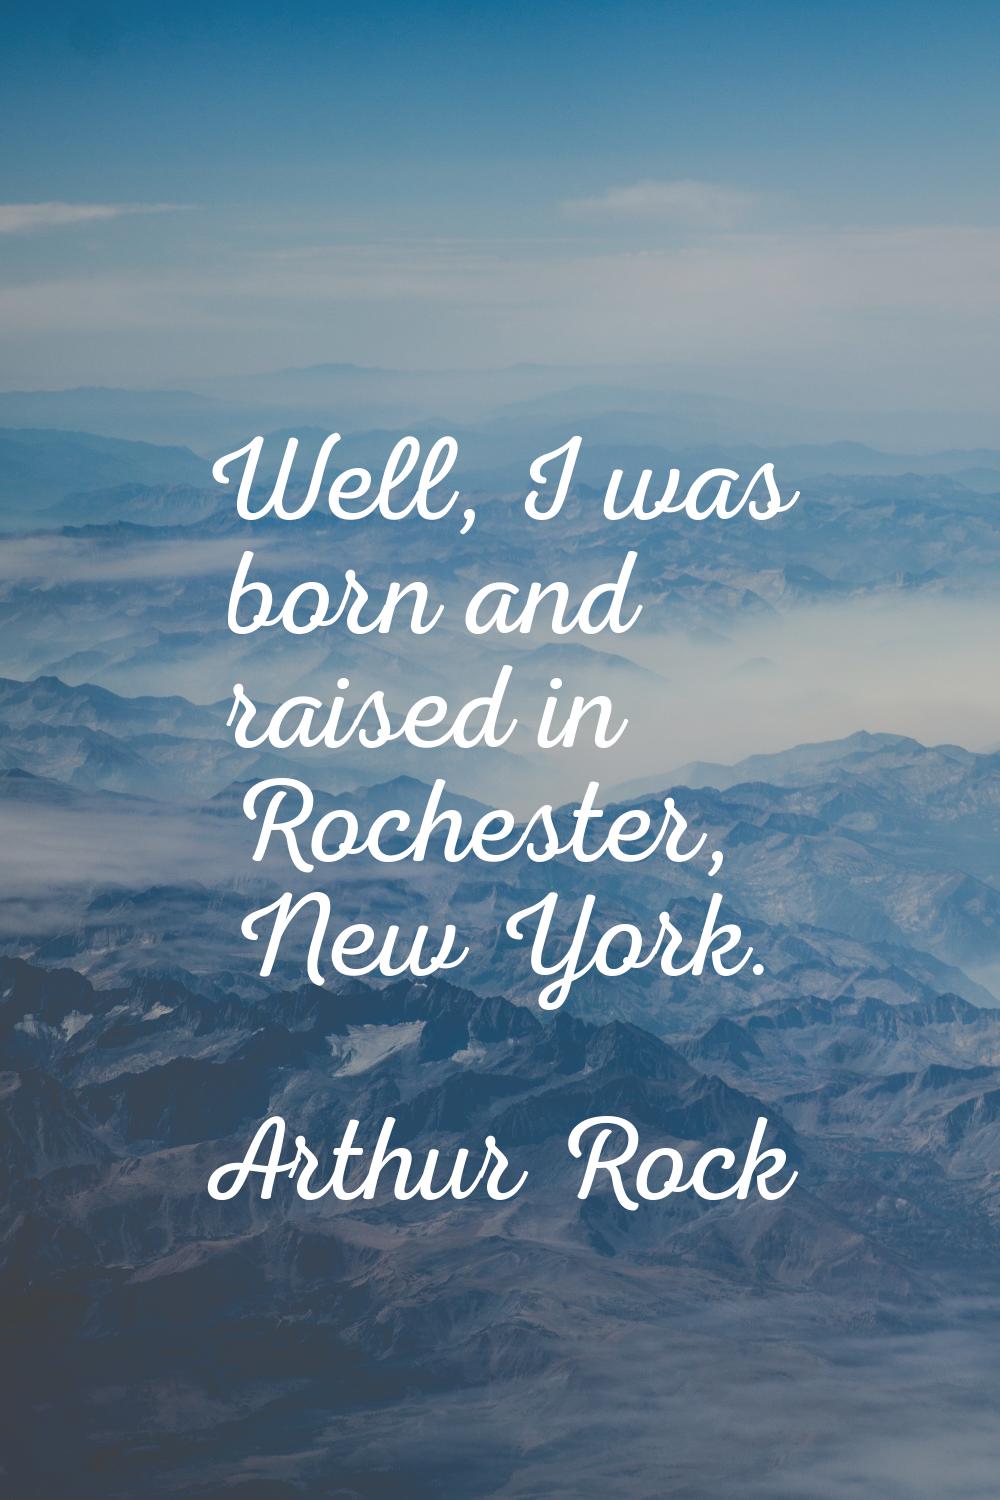 Well, I was born and raised in Rochester, New York.